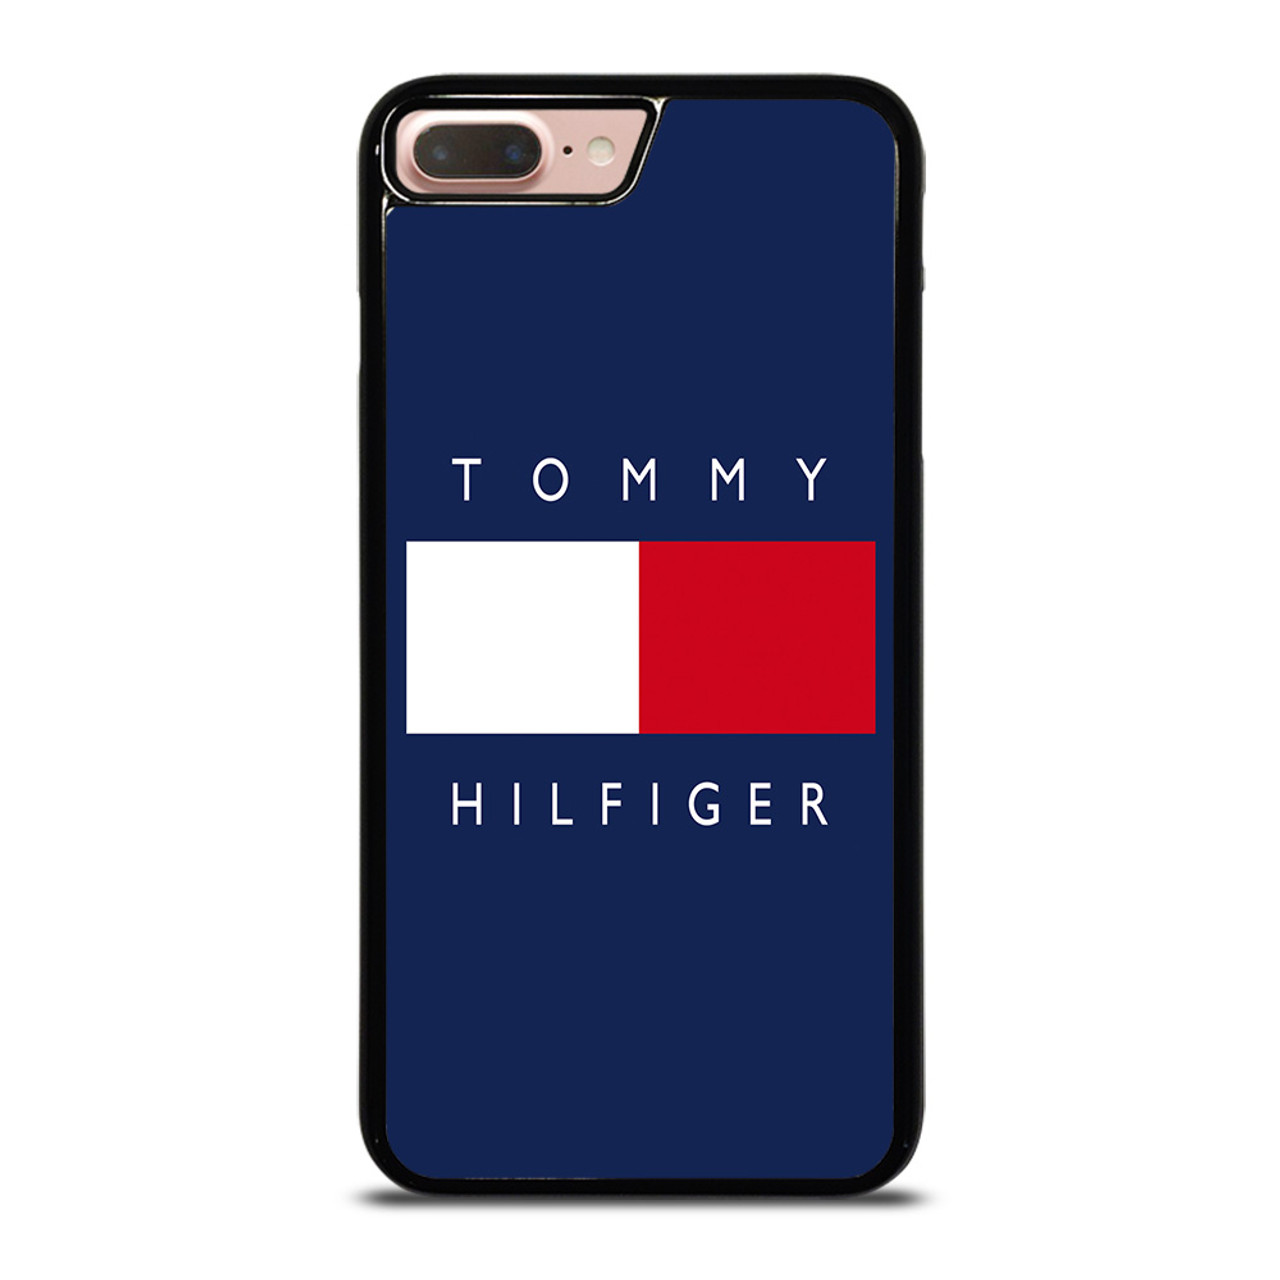 TOMMY HILFIGER iPhone 8 Case Cover